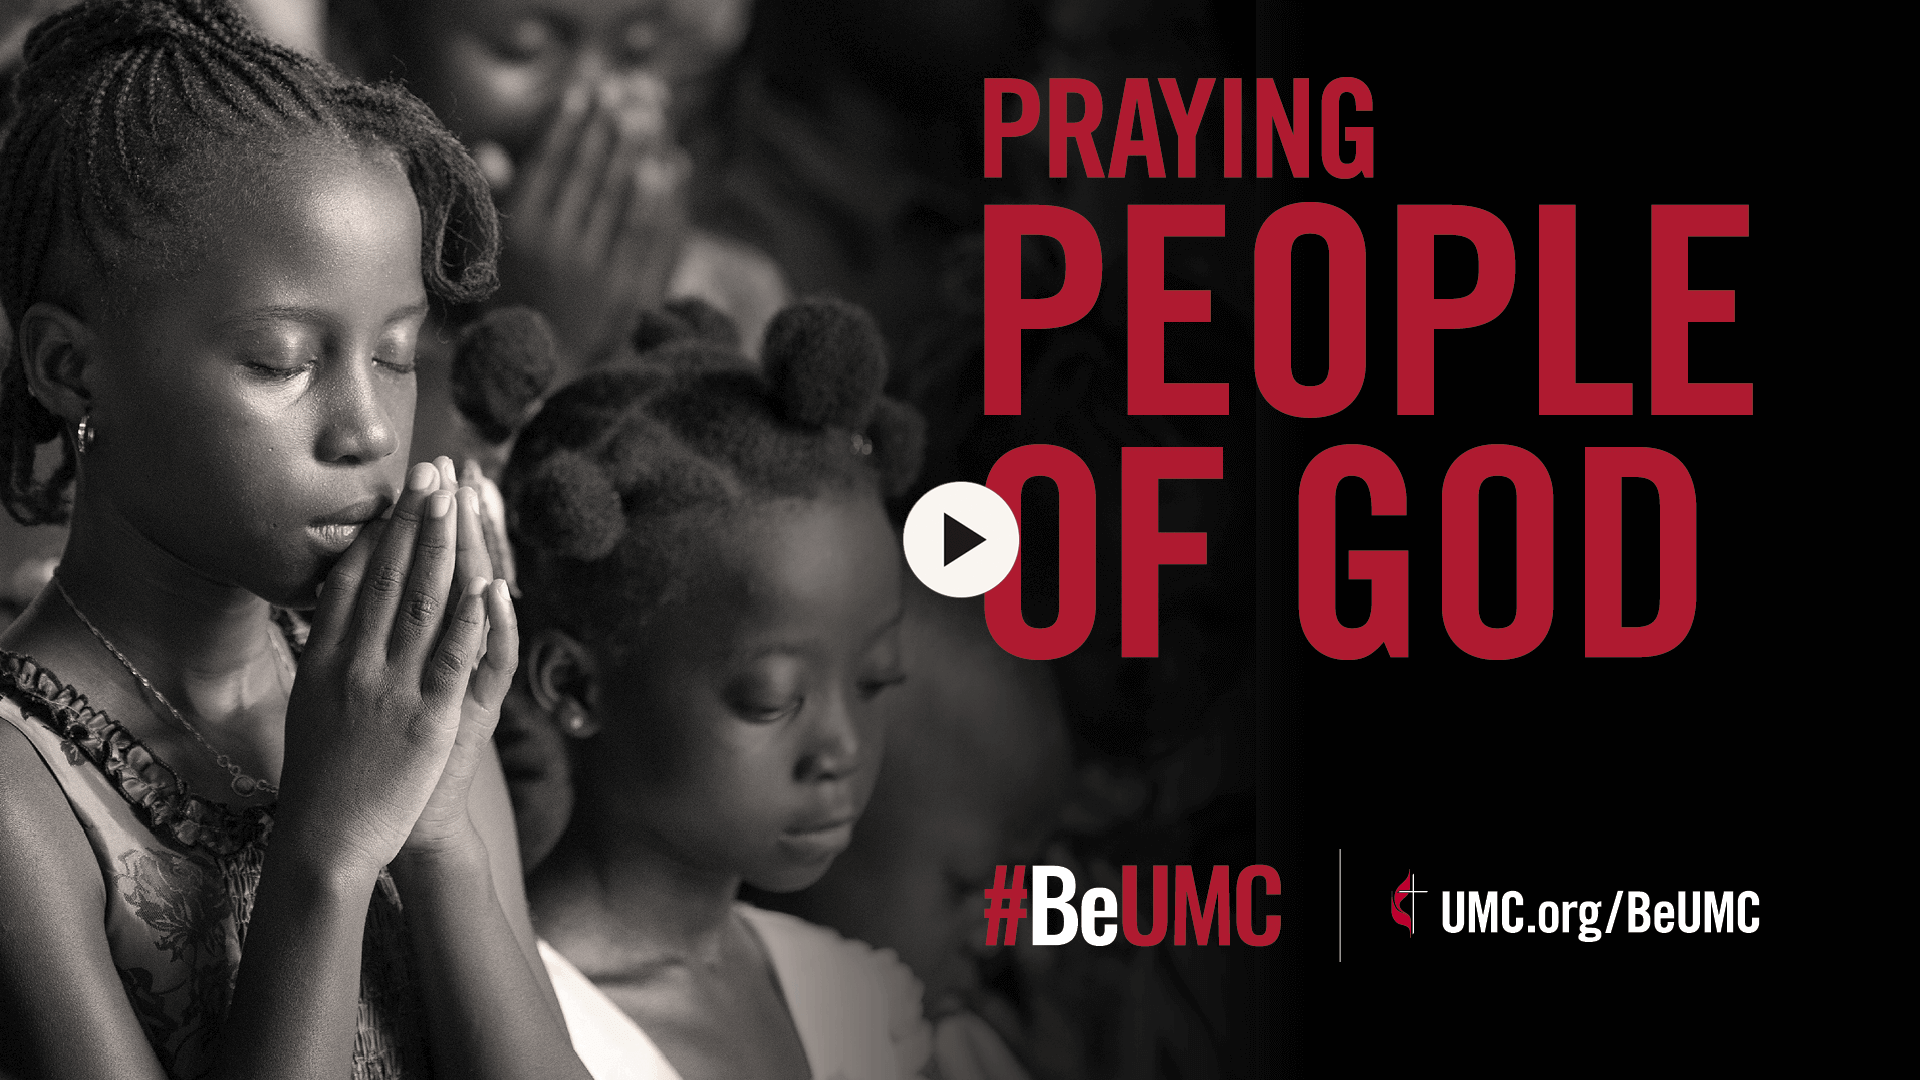 The #BeUMC campaign reminds us of who we are at our best. As people of God called The United Methodist Church, we’re faithful followers of Jesus seeking to make the world a better place. Praying (girl), video screenshot.